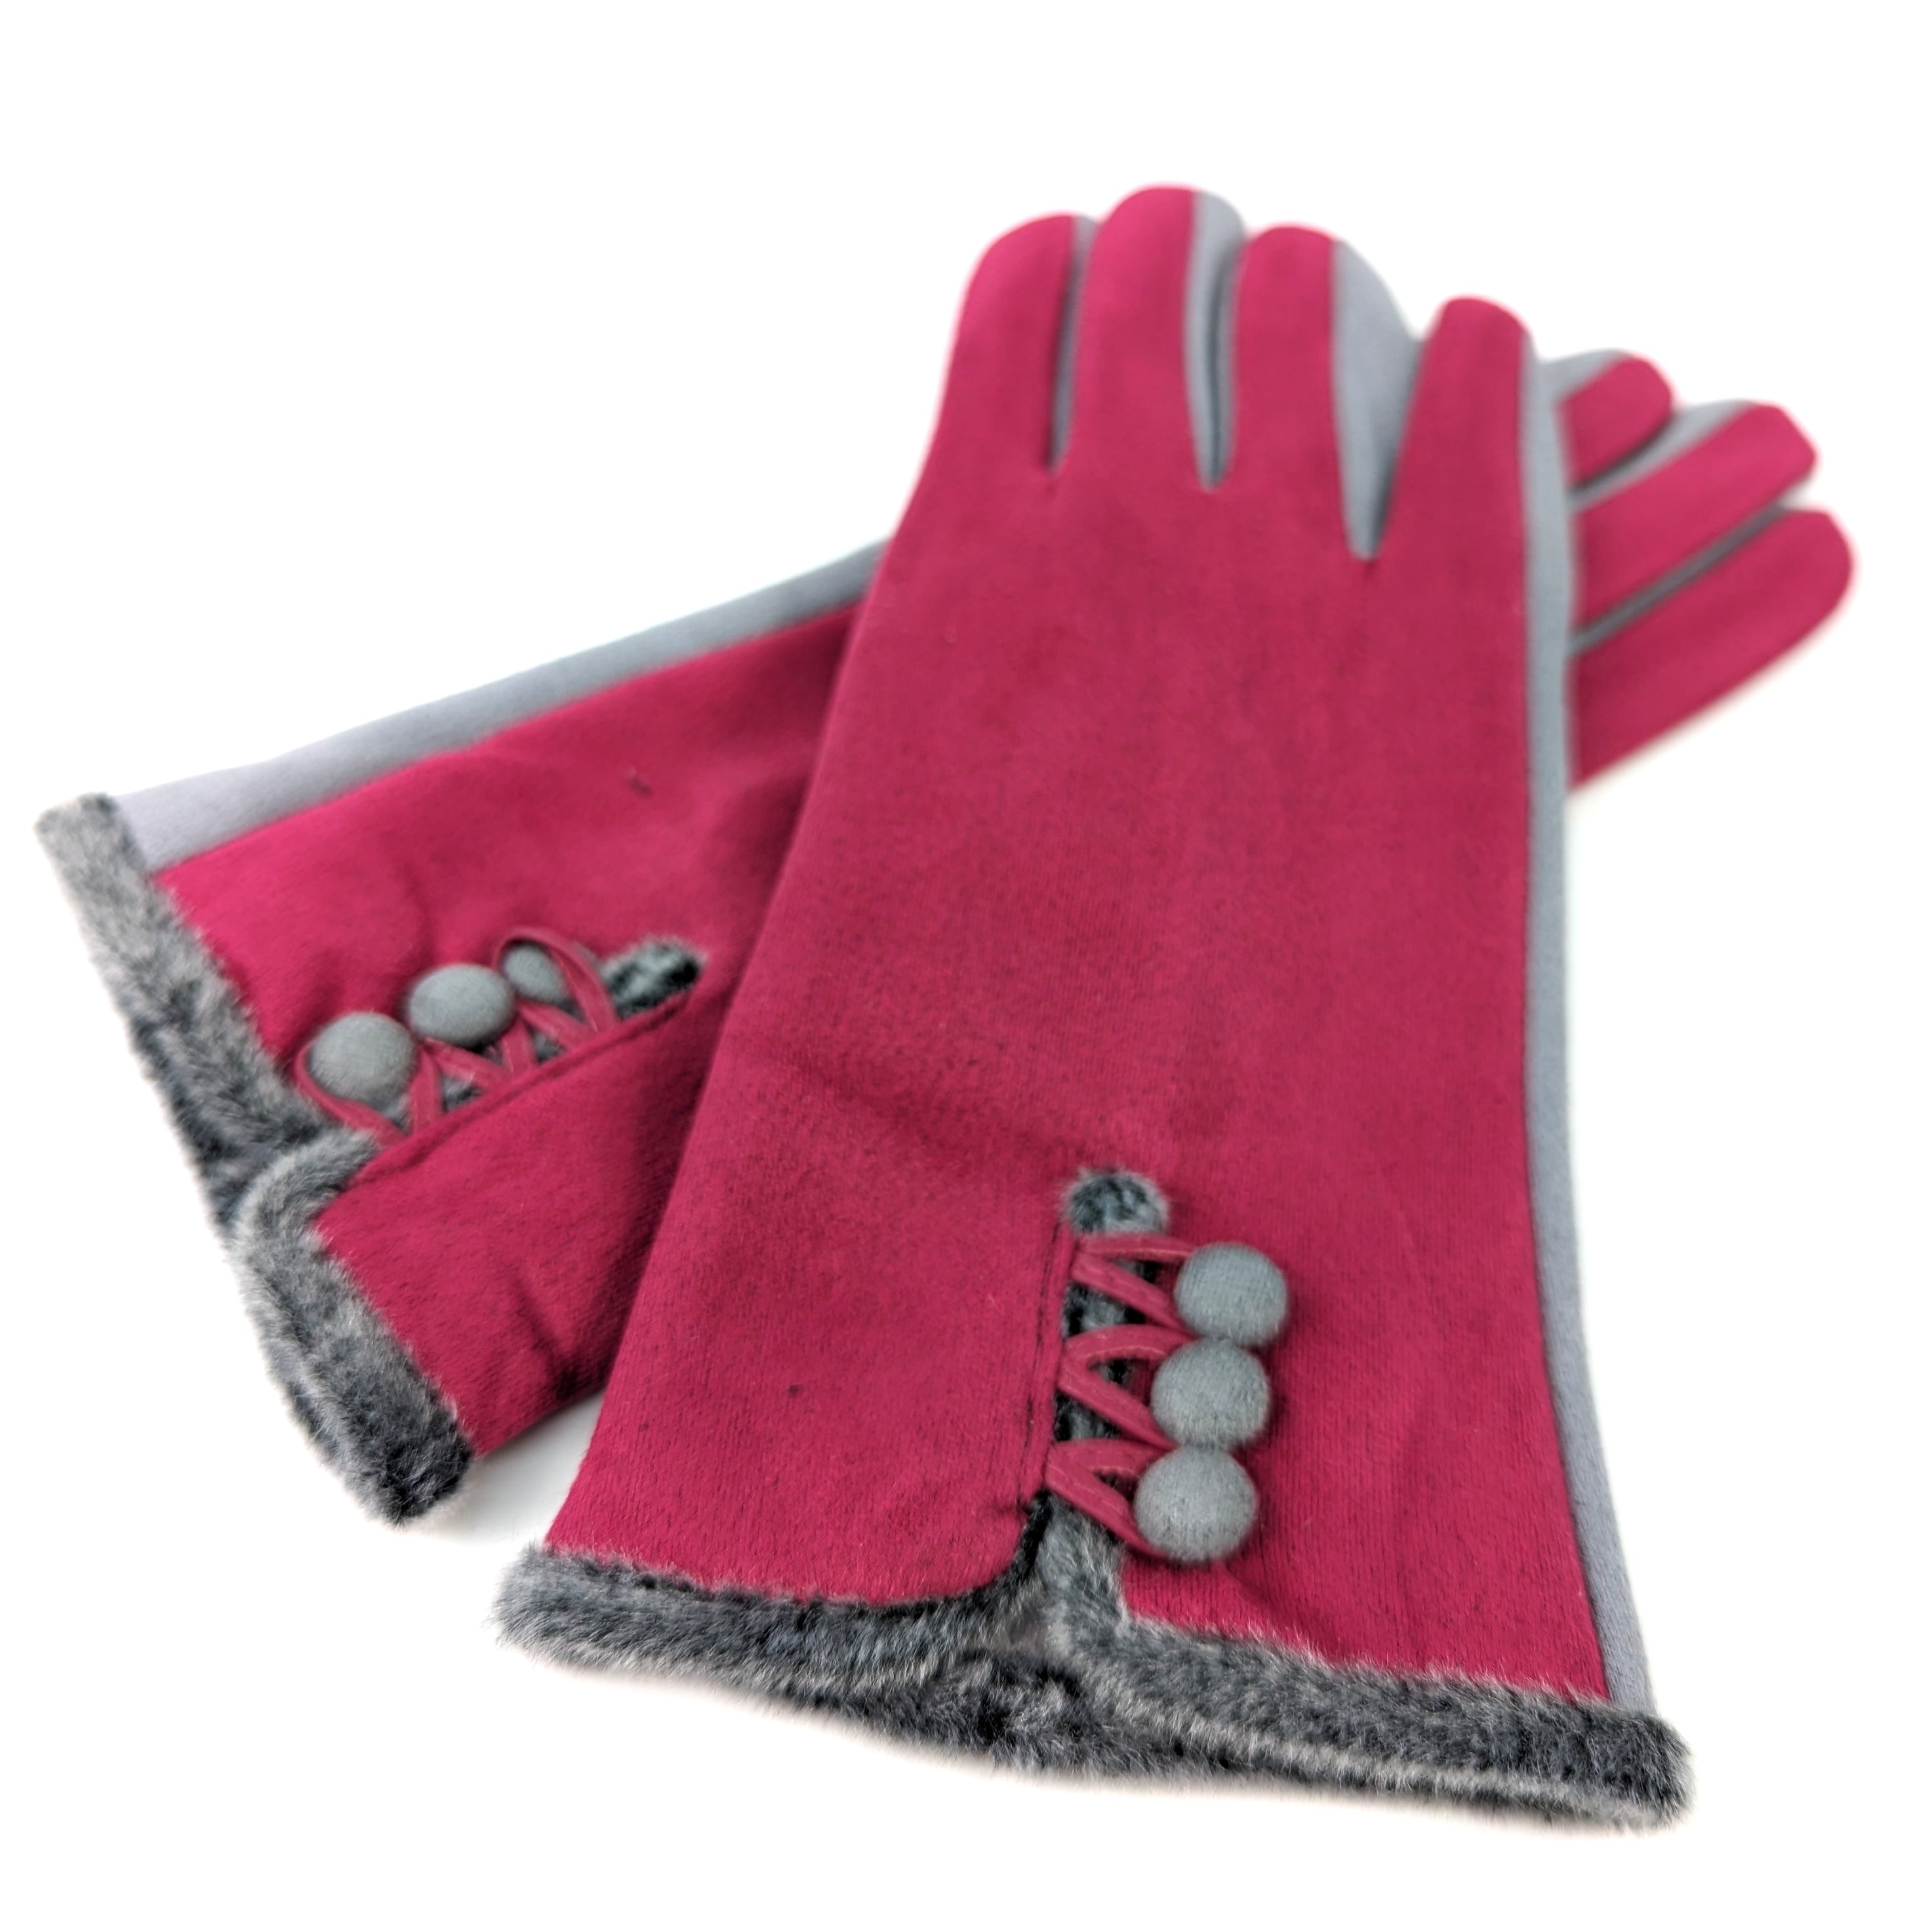 Bicolour Suede Effect Gloves with Faux Fur Trim - Pink/Grey